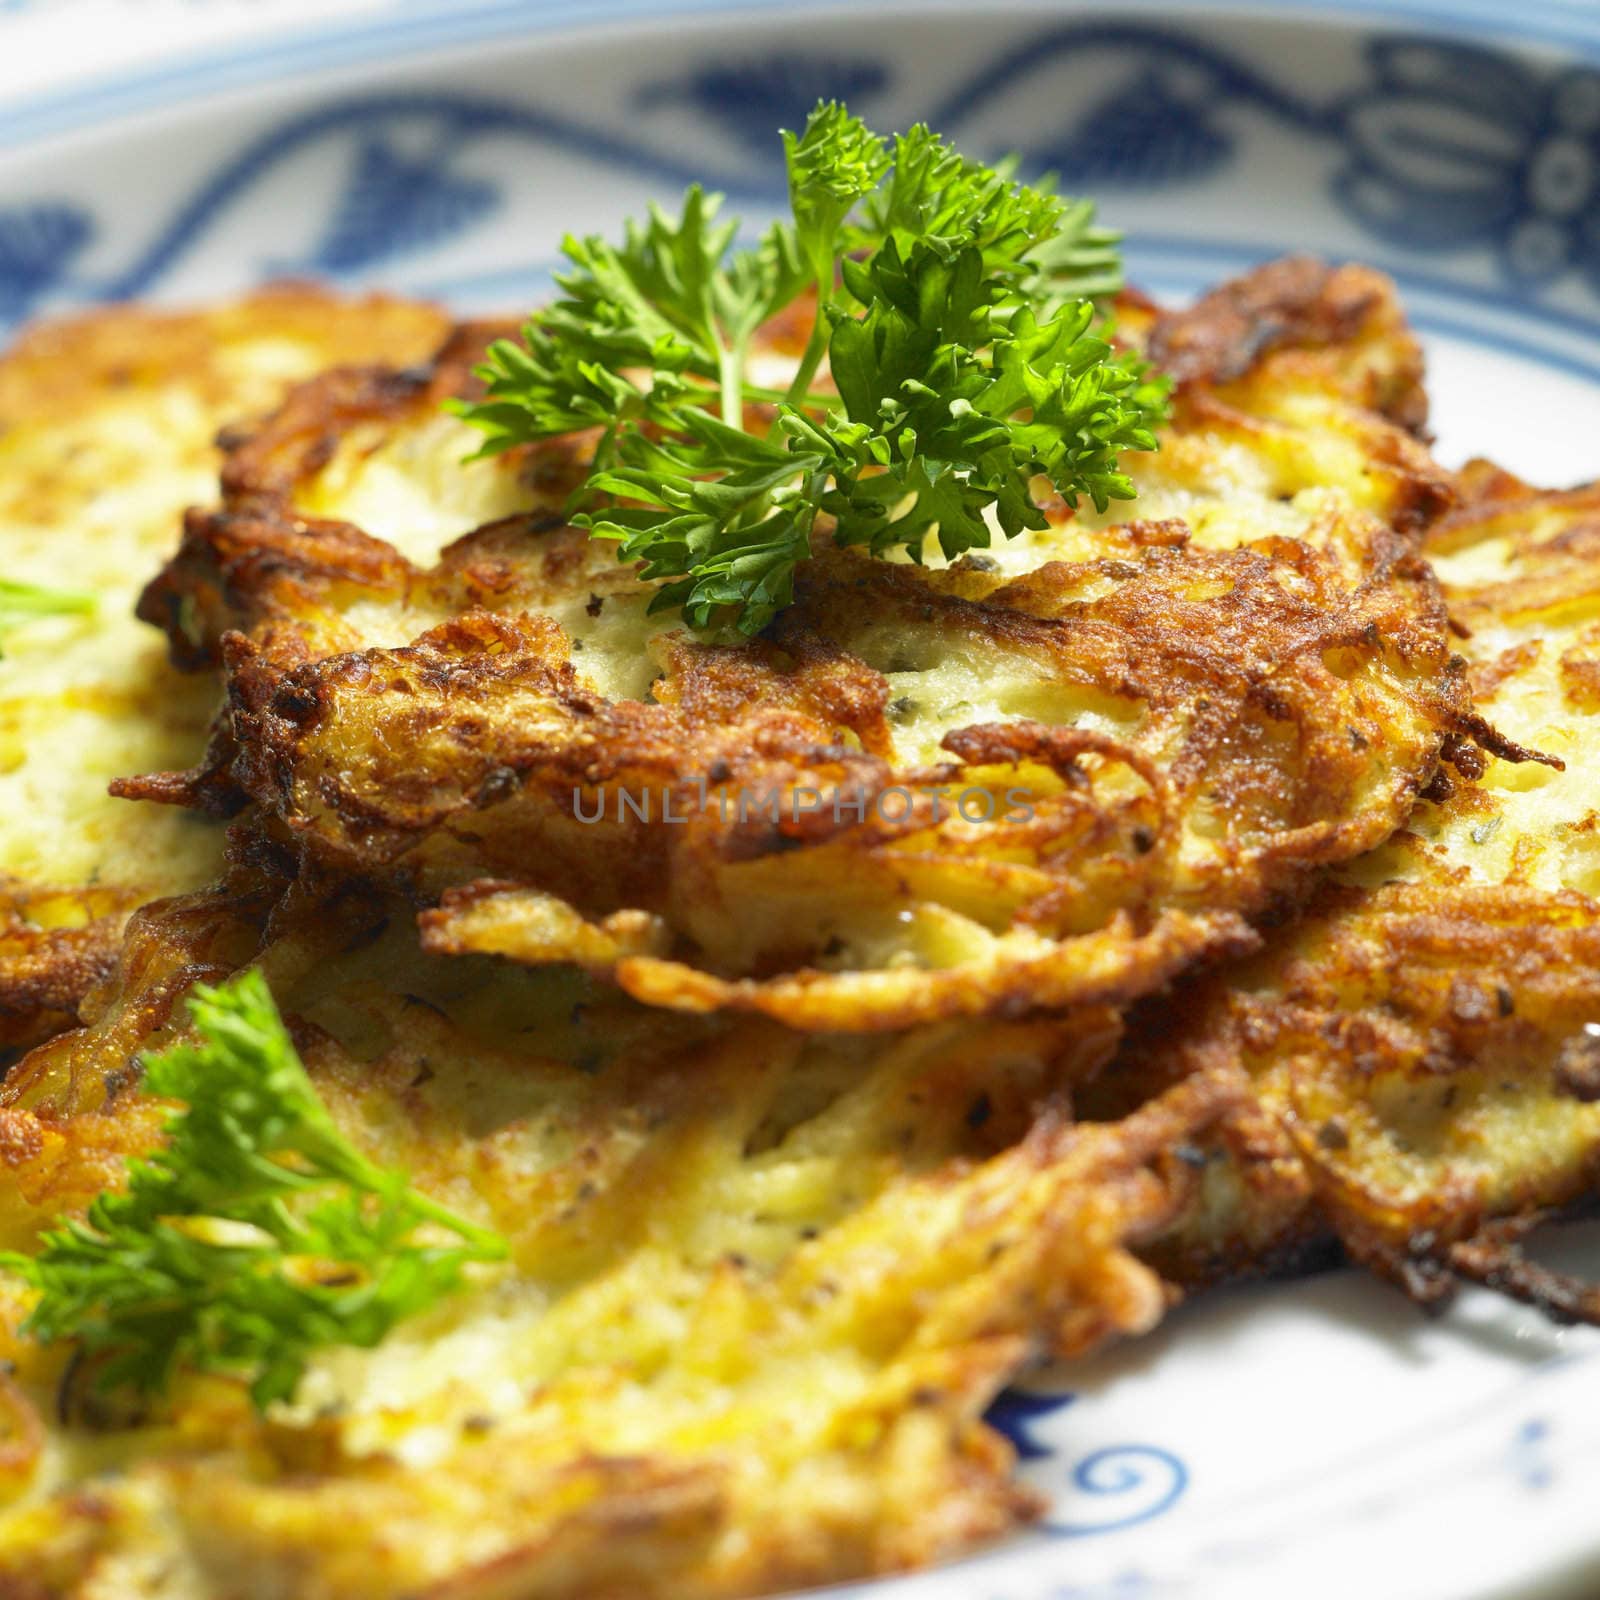 potato cakes with cabbage by phbcz